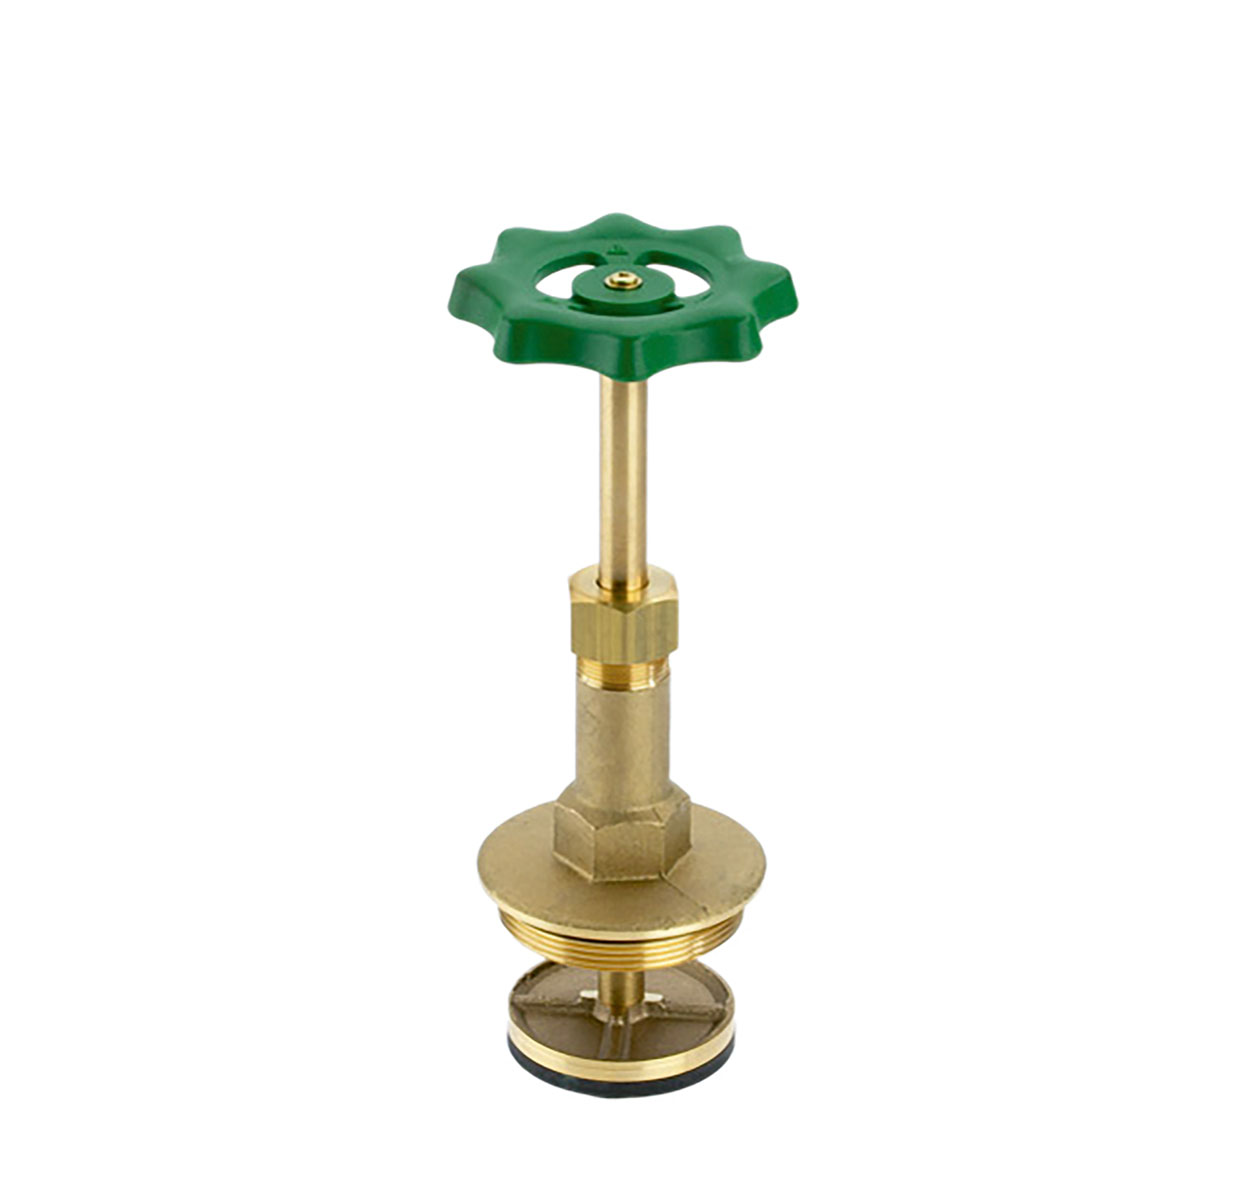 1218800 - Brass Upper-part with grease chamber for free-flow valves, rising spindle